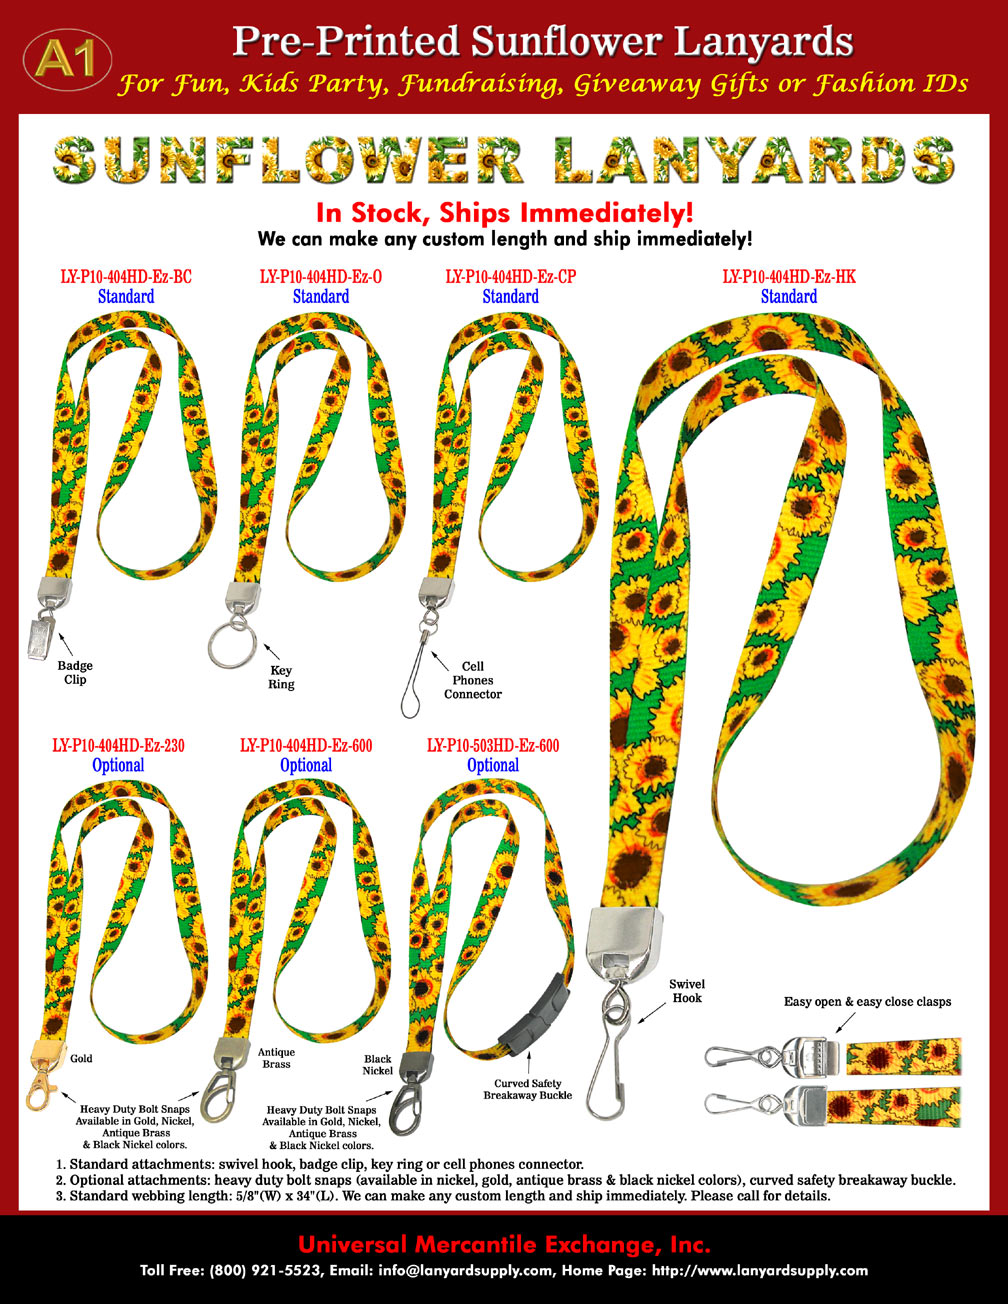 Sunflower Lanyards: Cool Sunflower Print Lanyards, Sunflower Stripes or Patterns Printed Lanyards. Good For Zoo, Kids Party, Fundraising, Promotional Giveaway, Gifts or For Small Business Fashion ID Name Badge Holders.